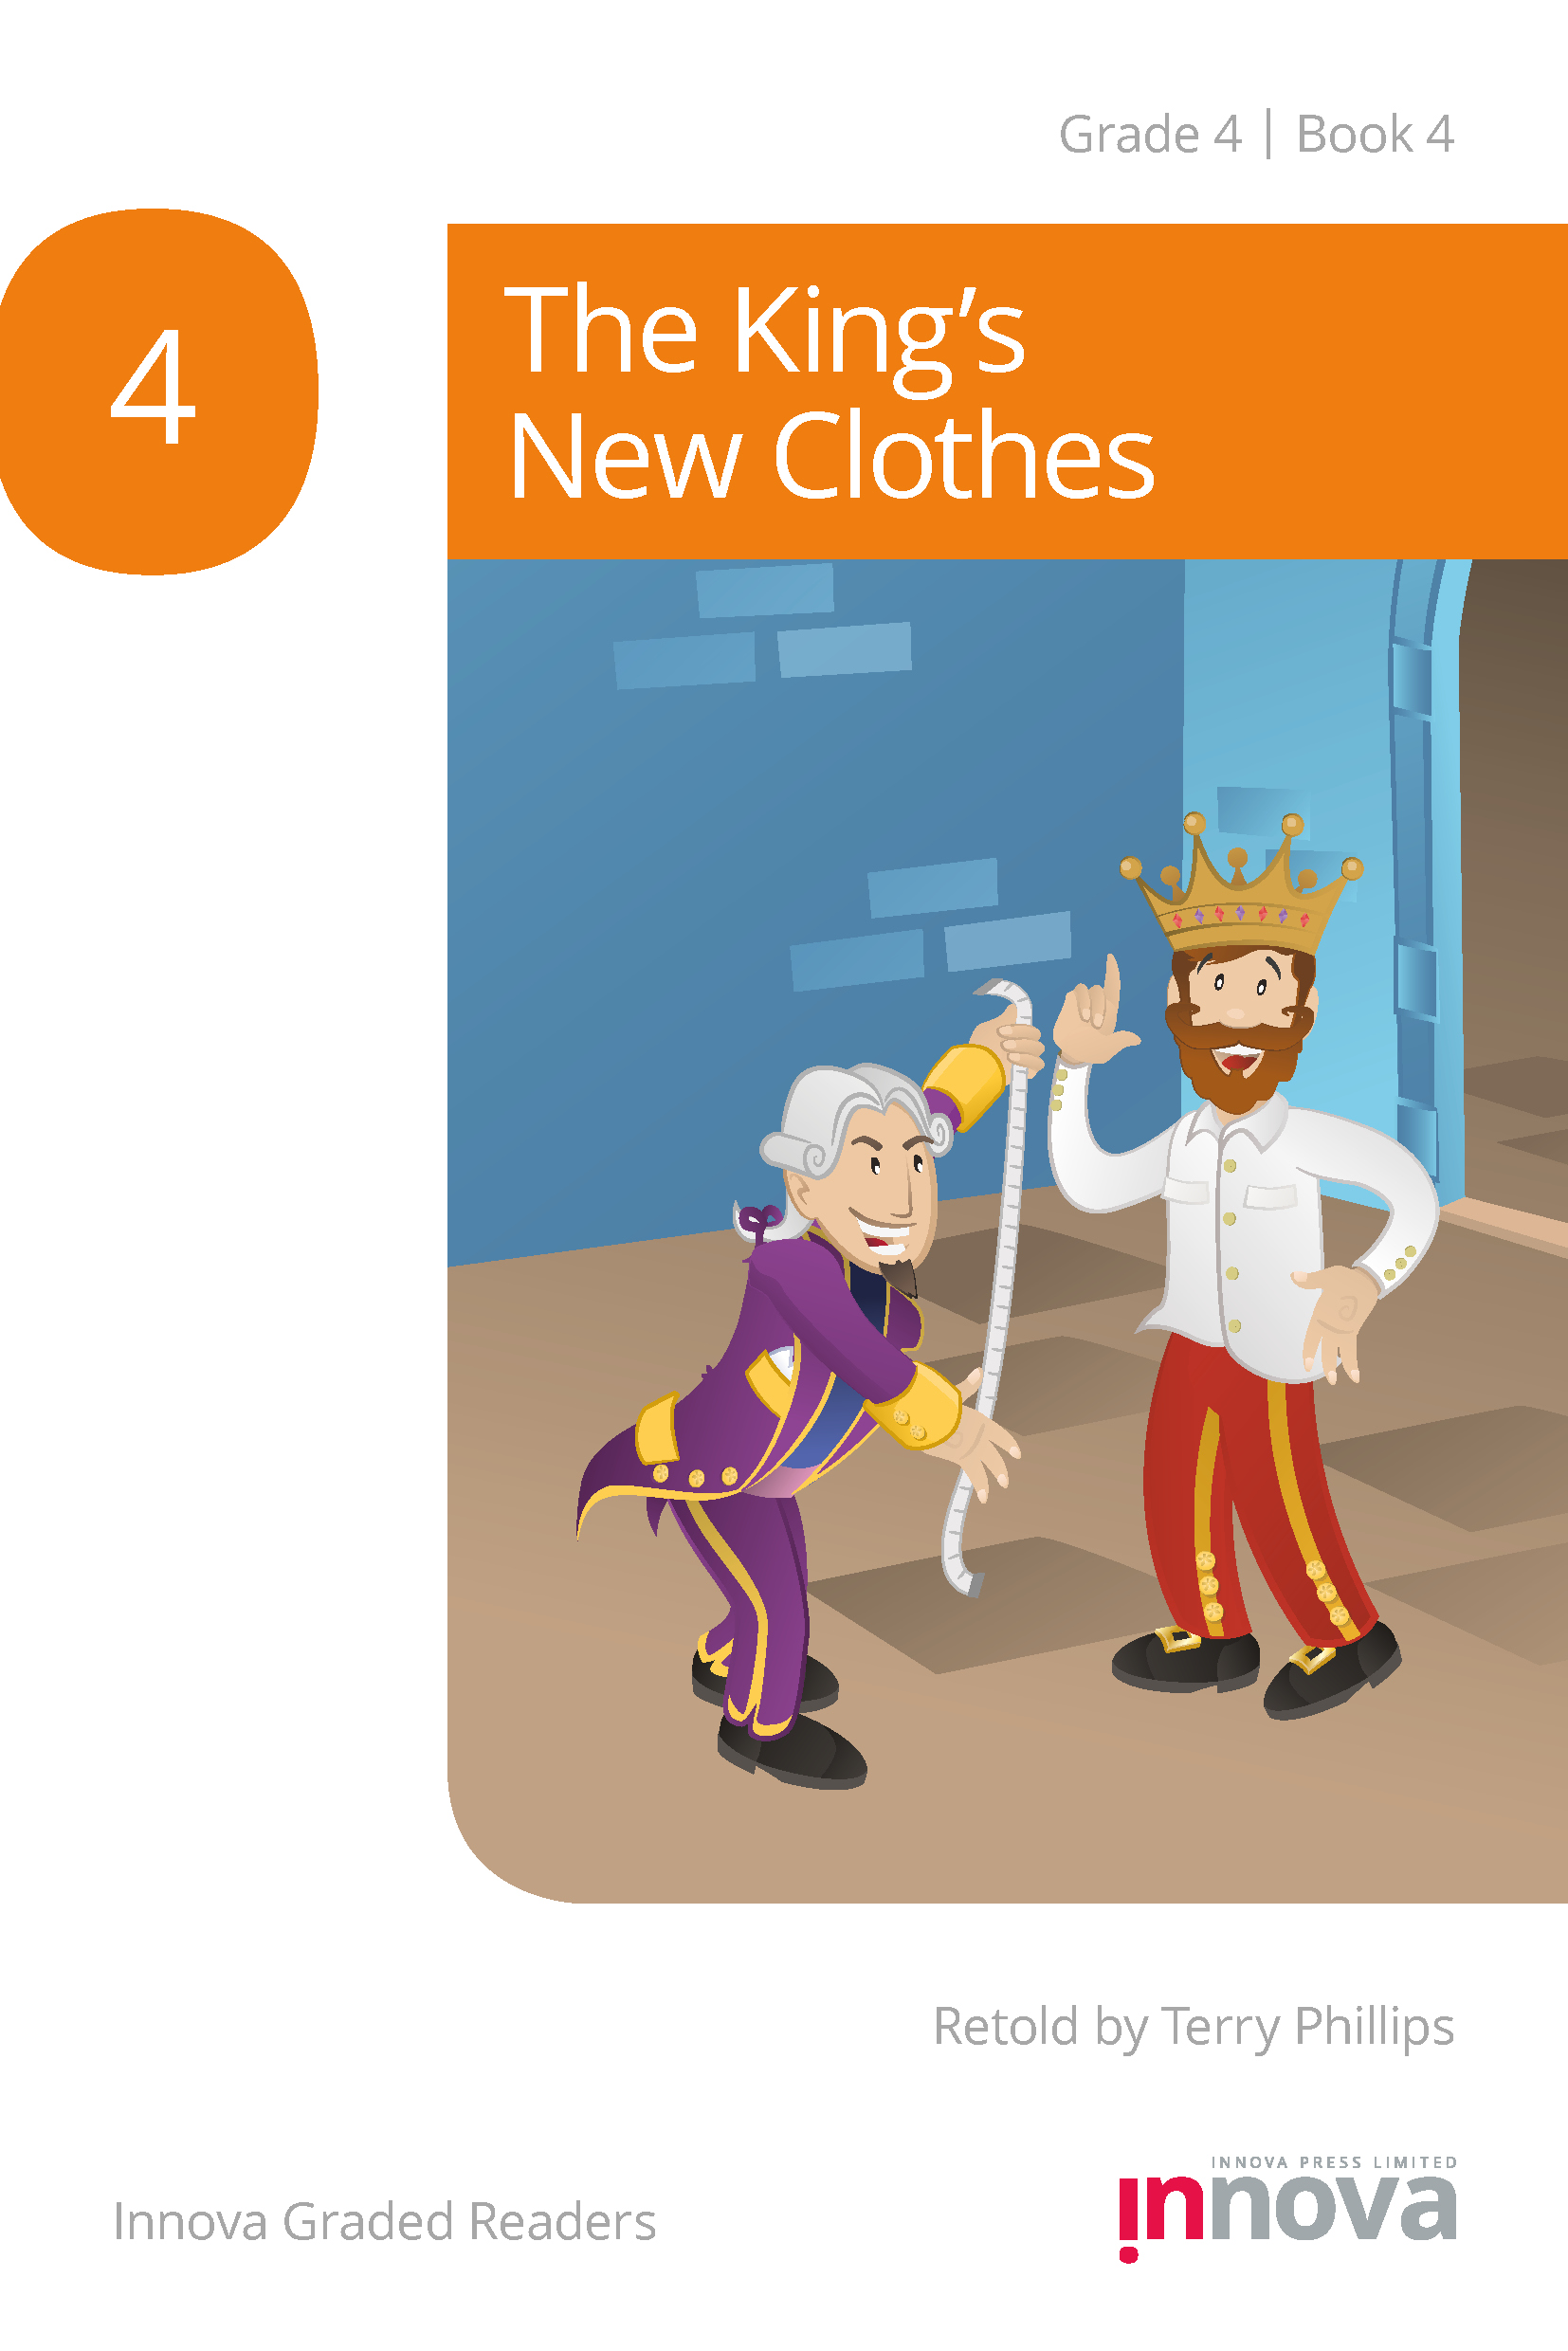 Innova Press The King's New Clothes cover, a man in a purple suit hold a tape measure next to a man in a crown